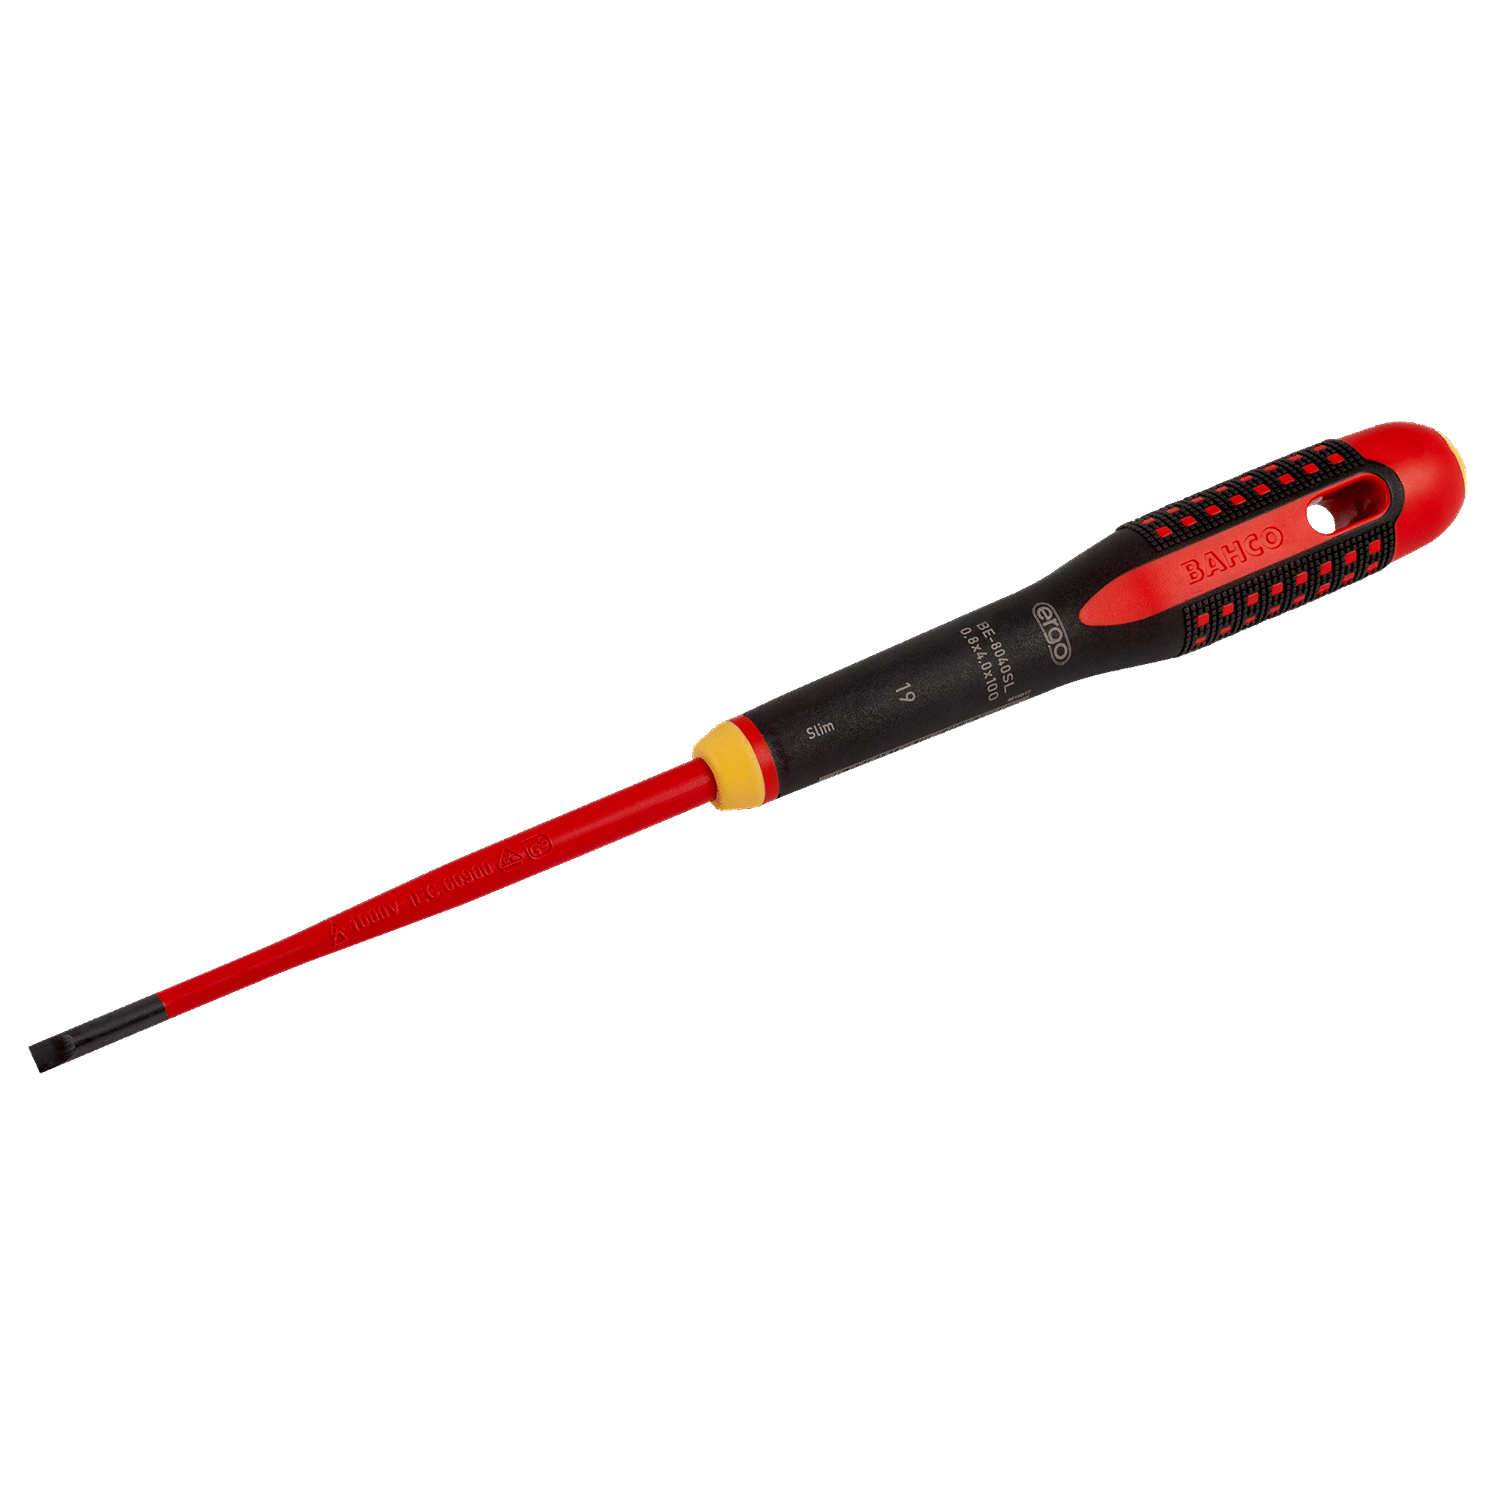 BAHCO BE-8220SL - BE-8255SL ERGO Slim Insulated VDE Screwdriver - Premium VDE Screwdriver from BAHCO - Shop now at Yew Aik.